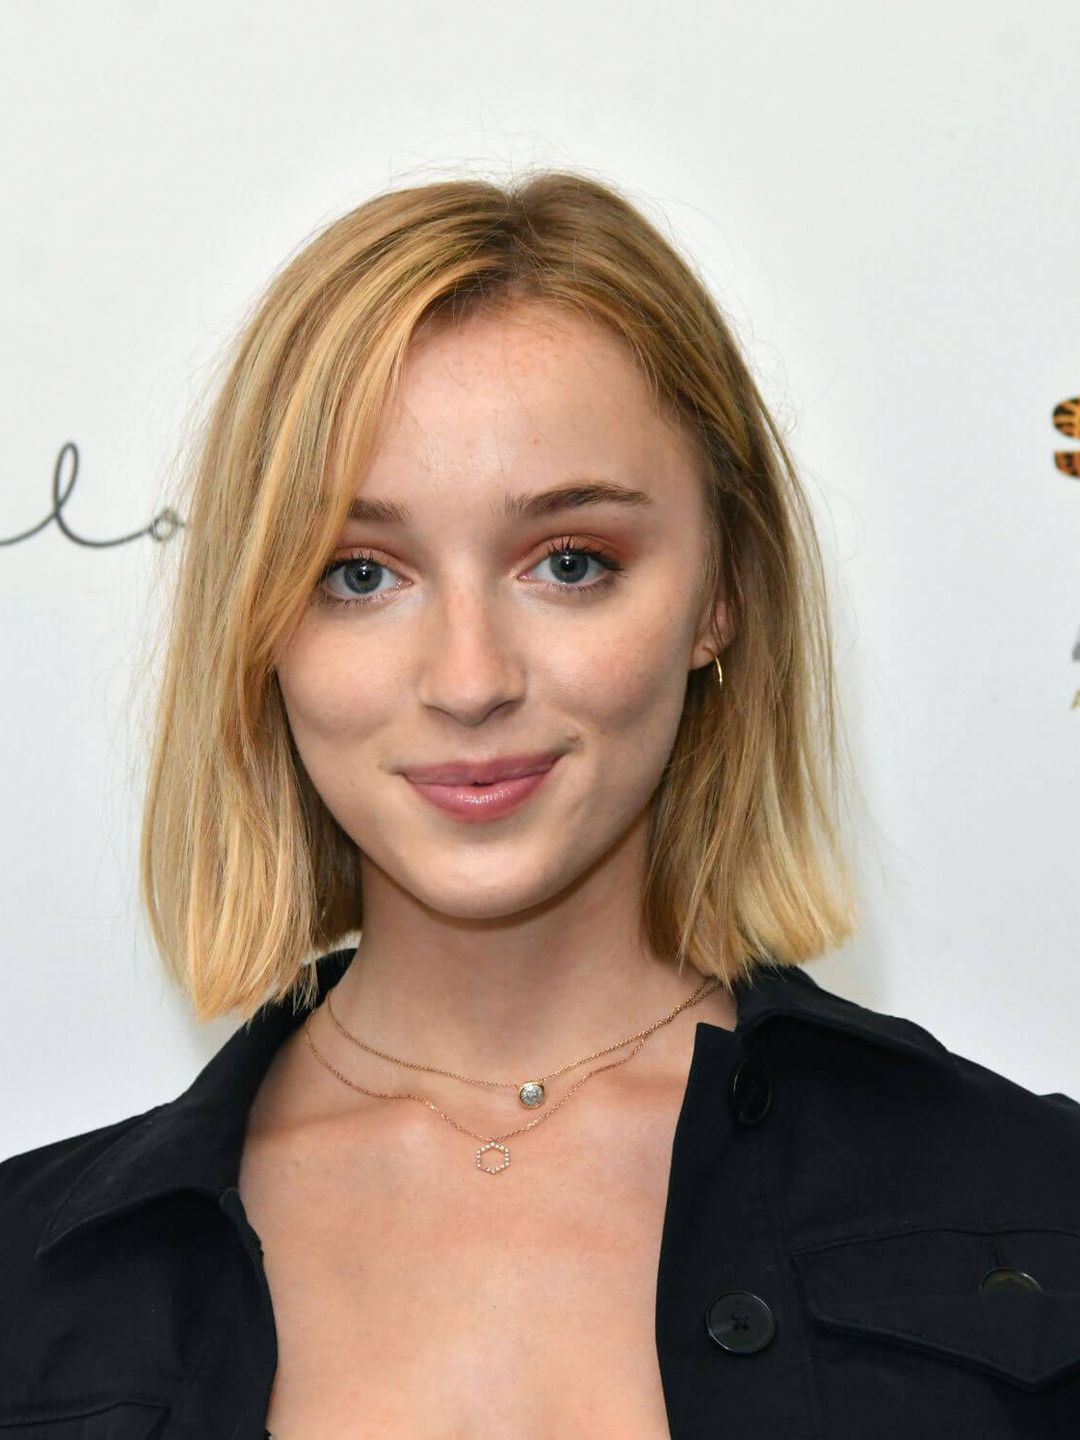 Phoebe Dynevor how did she became famous